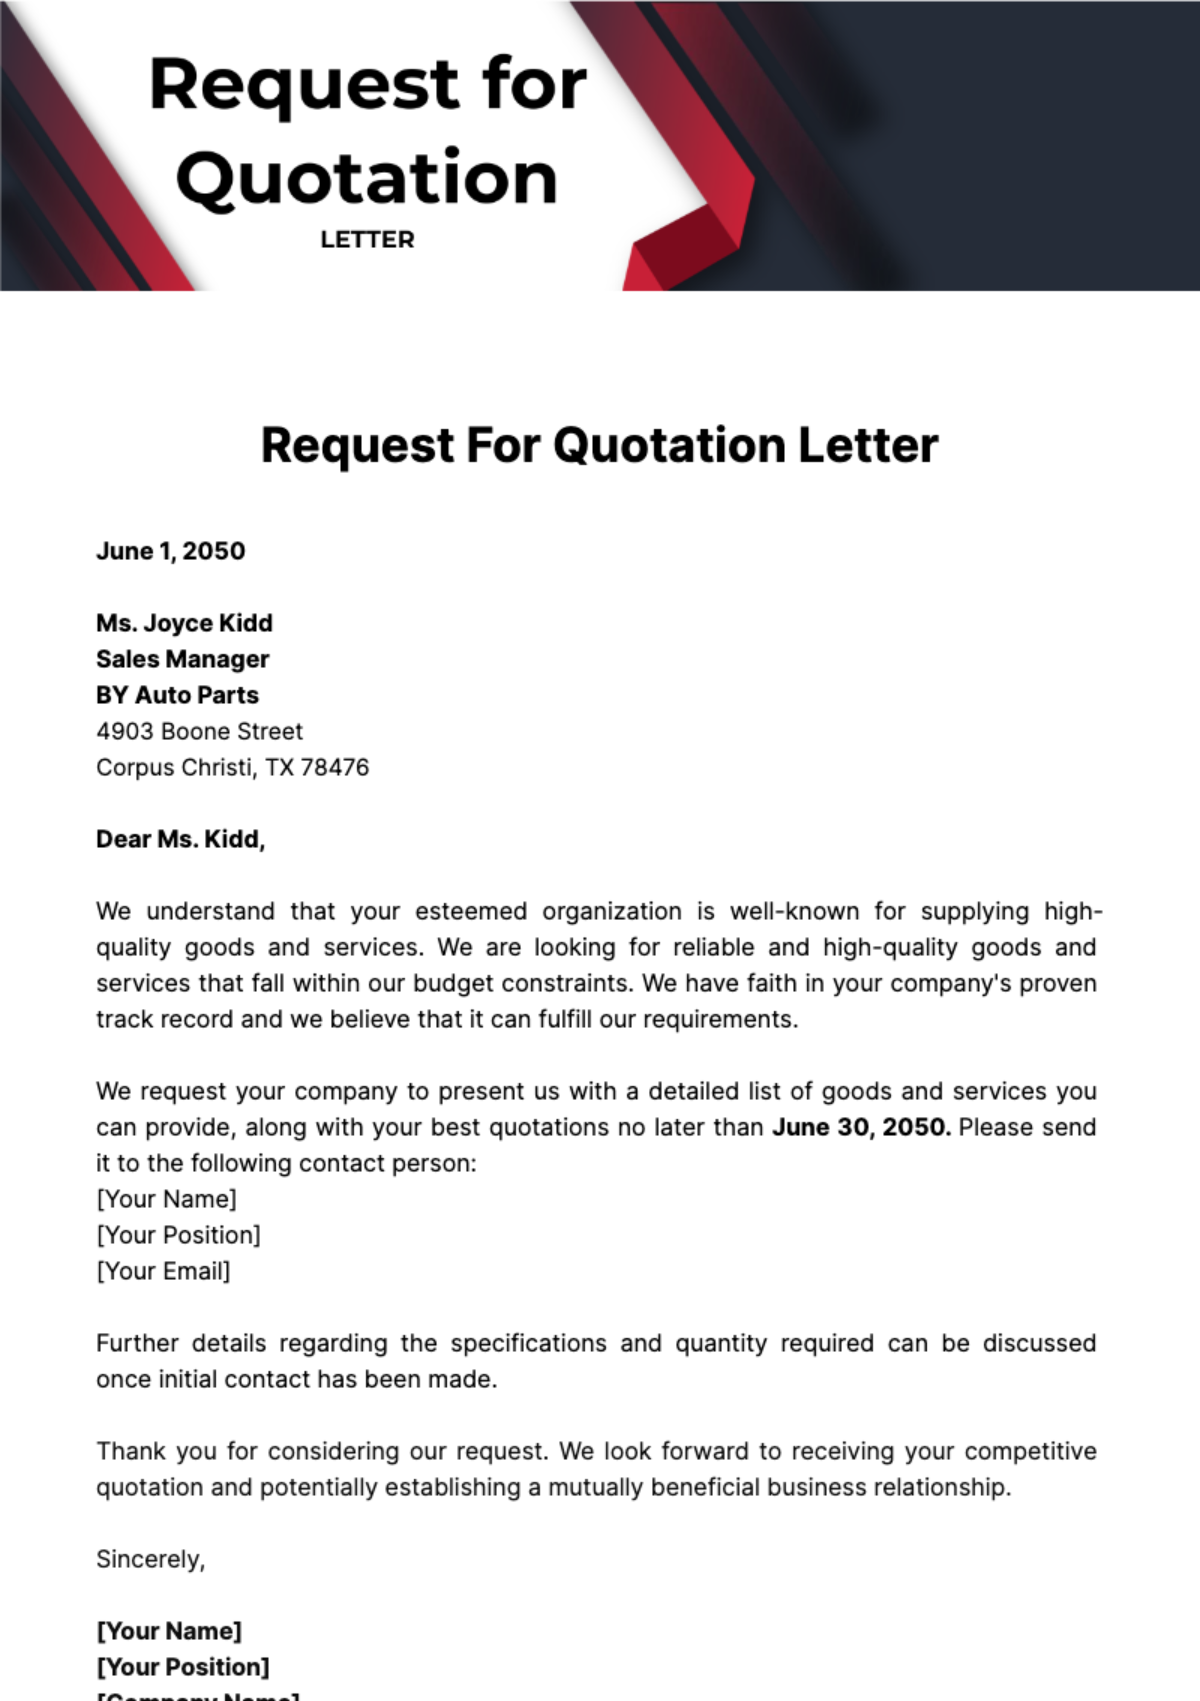 Request for Quotation Letter Template